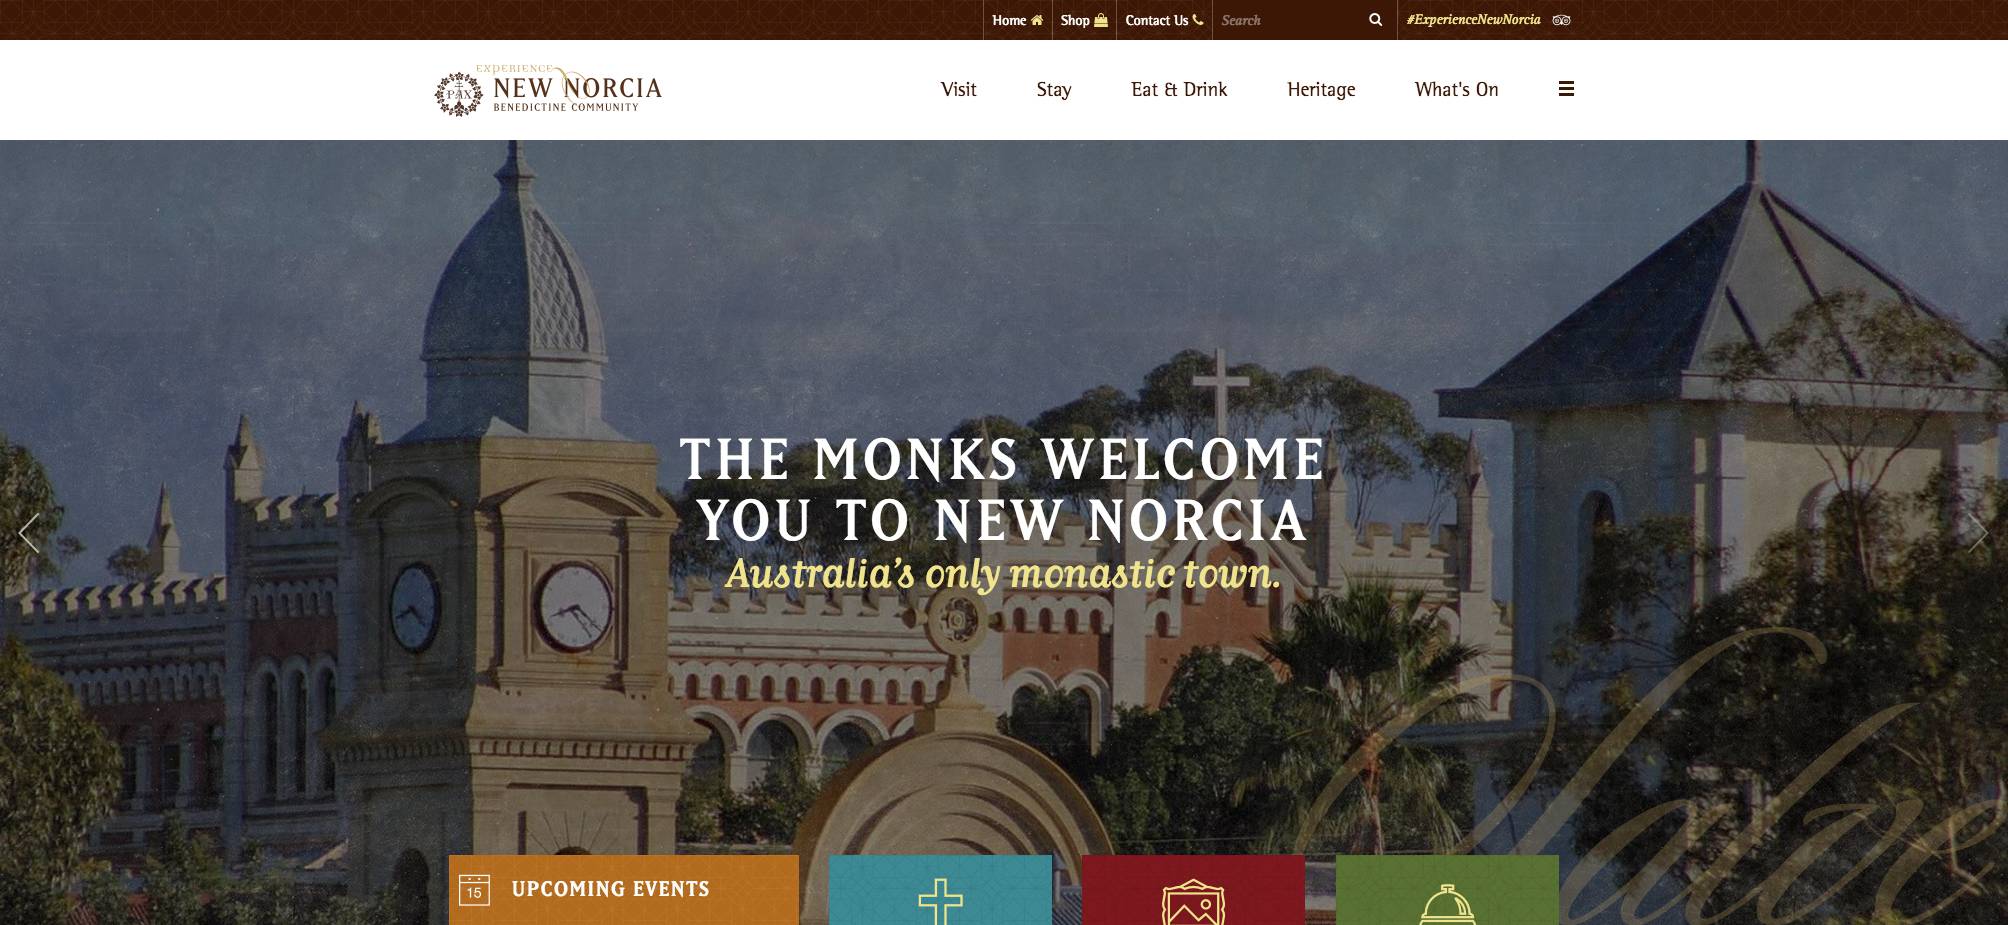 New Norcia Website - menu and carousel